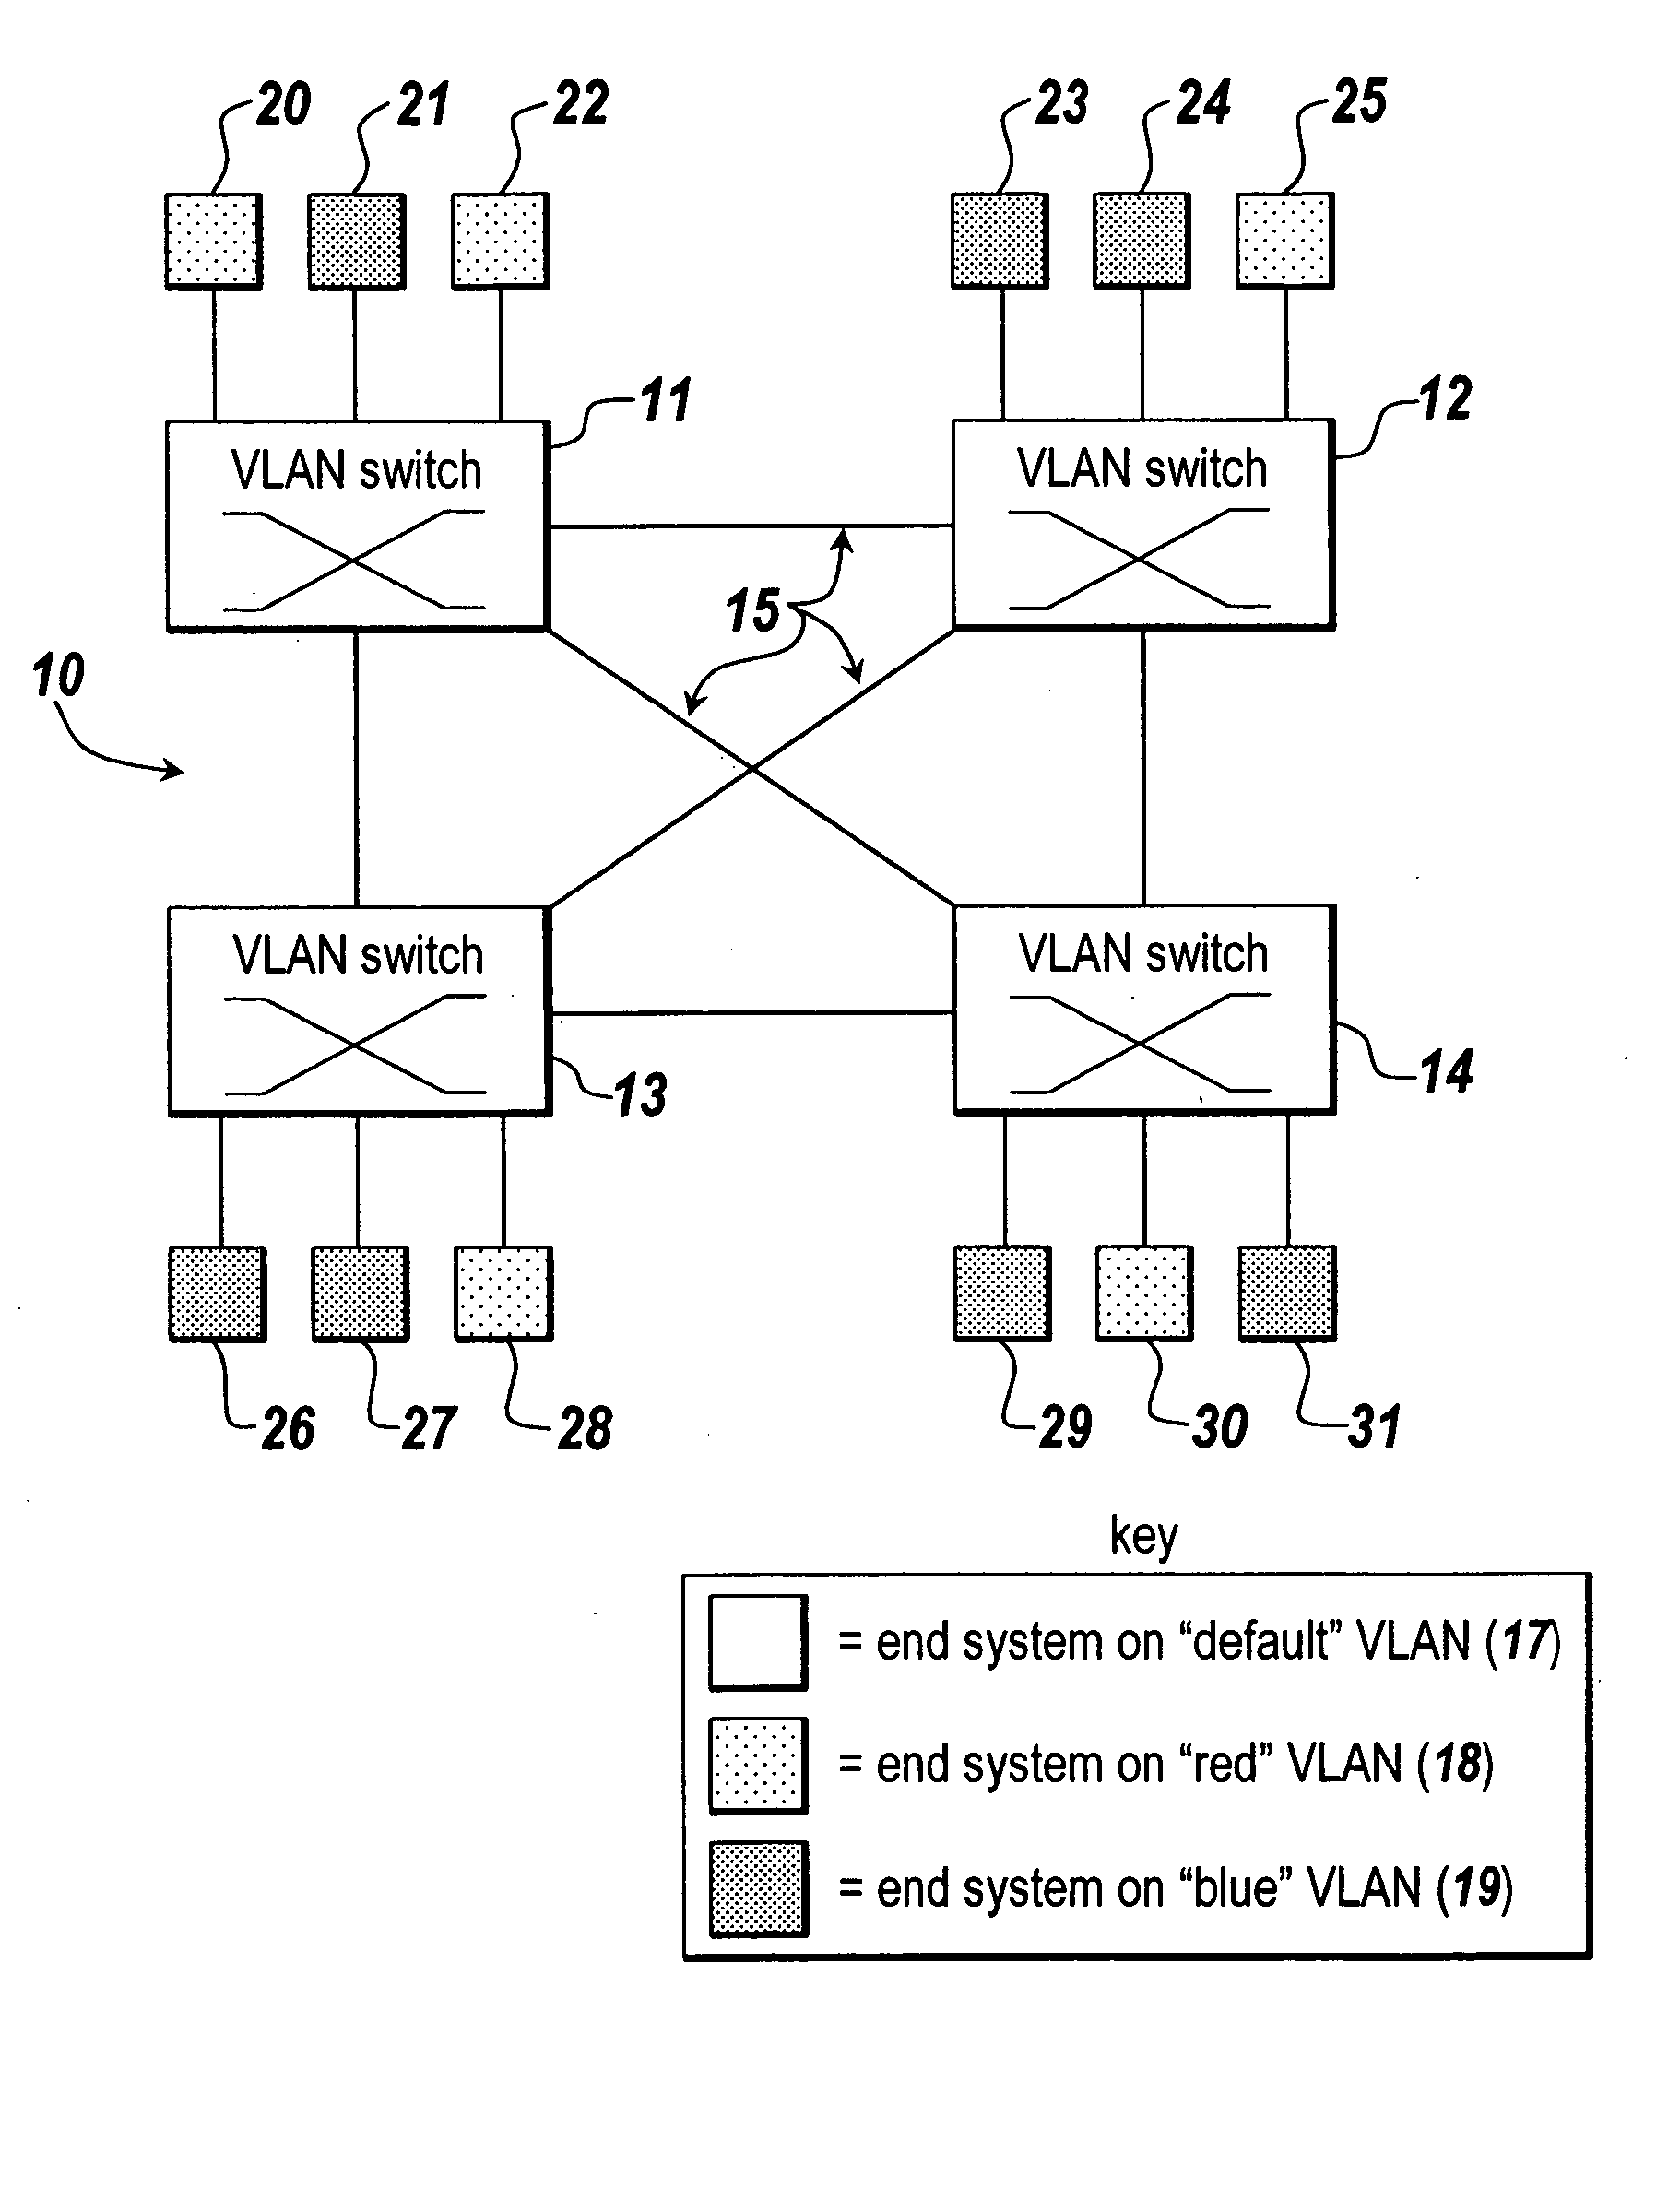 Distributed connection-oriented services for switched communication networks